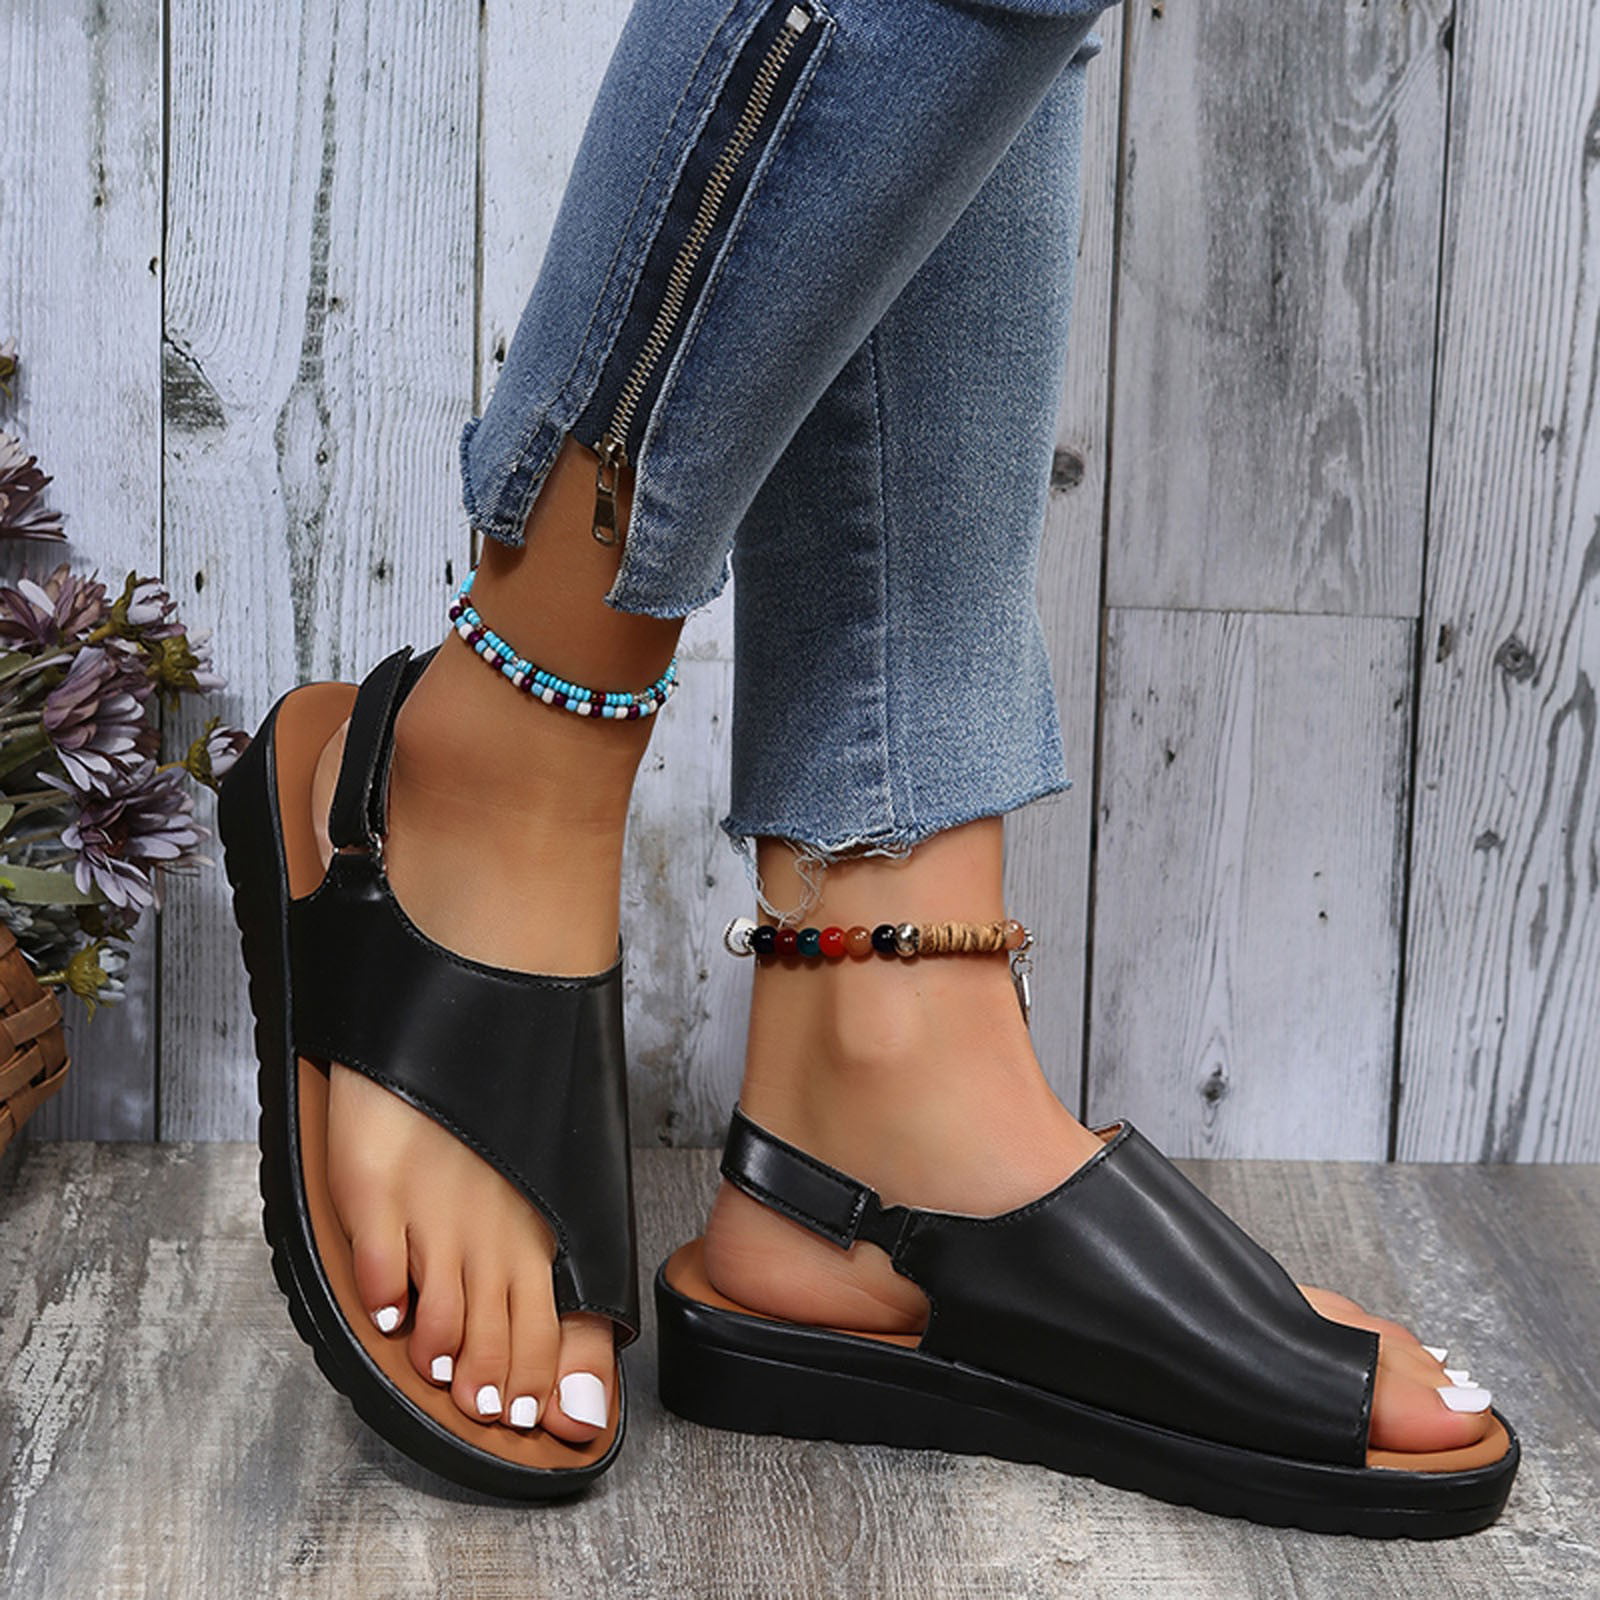 HSMQHJWE Pinch Toe Wide Width Sandals Women's Open Toes Band Ankle Strap Flat  Sandals Summer Low Heel Fashion Sandals Shoes（Black,8.5) 